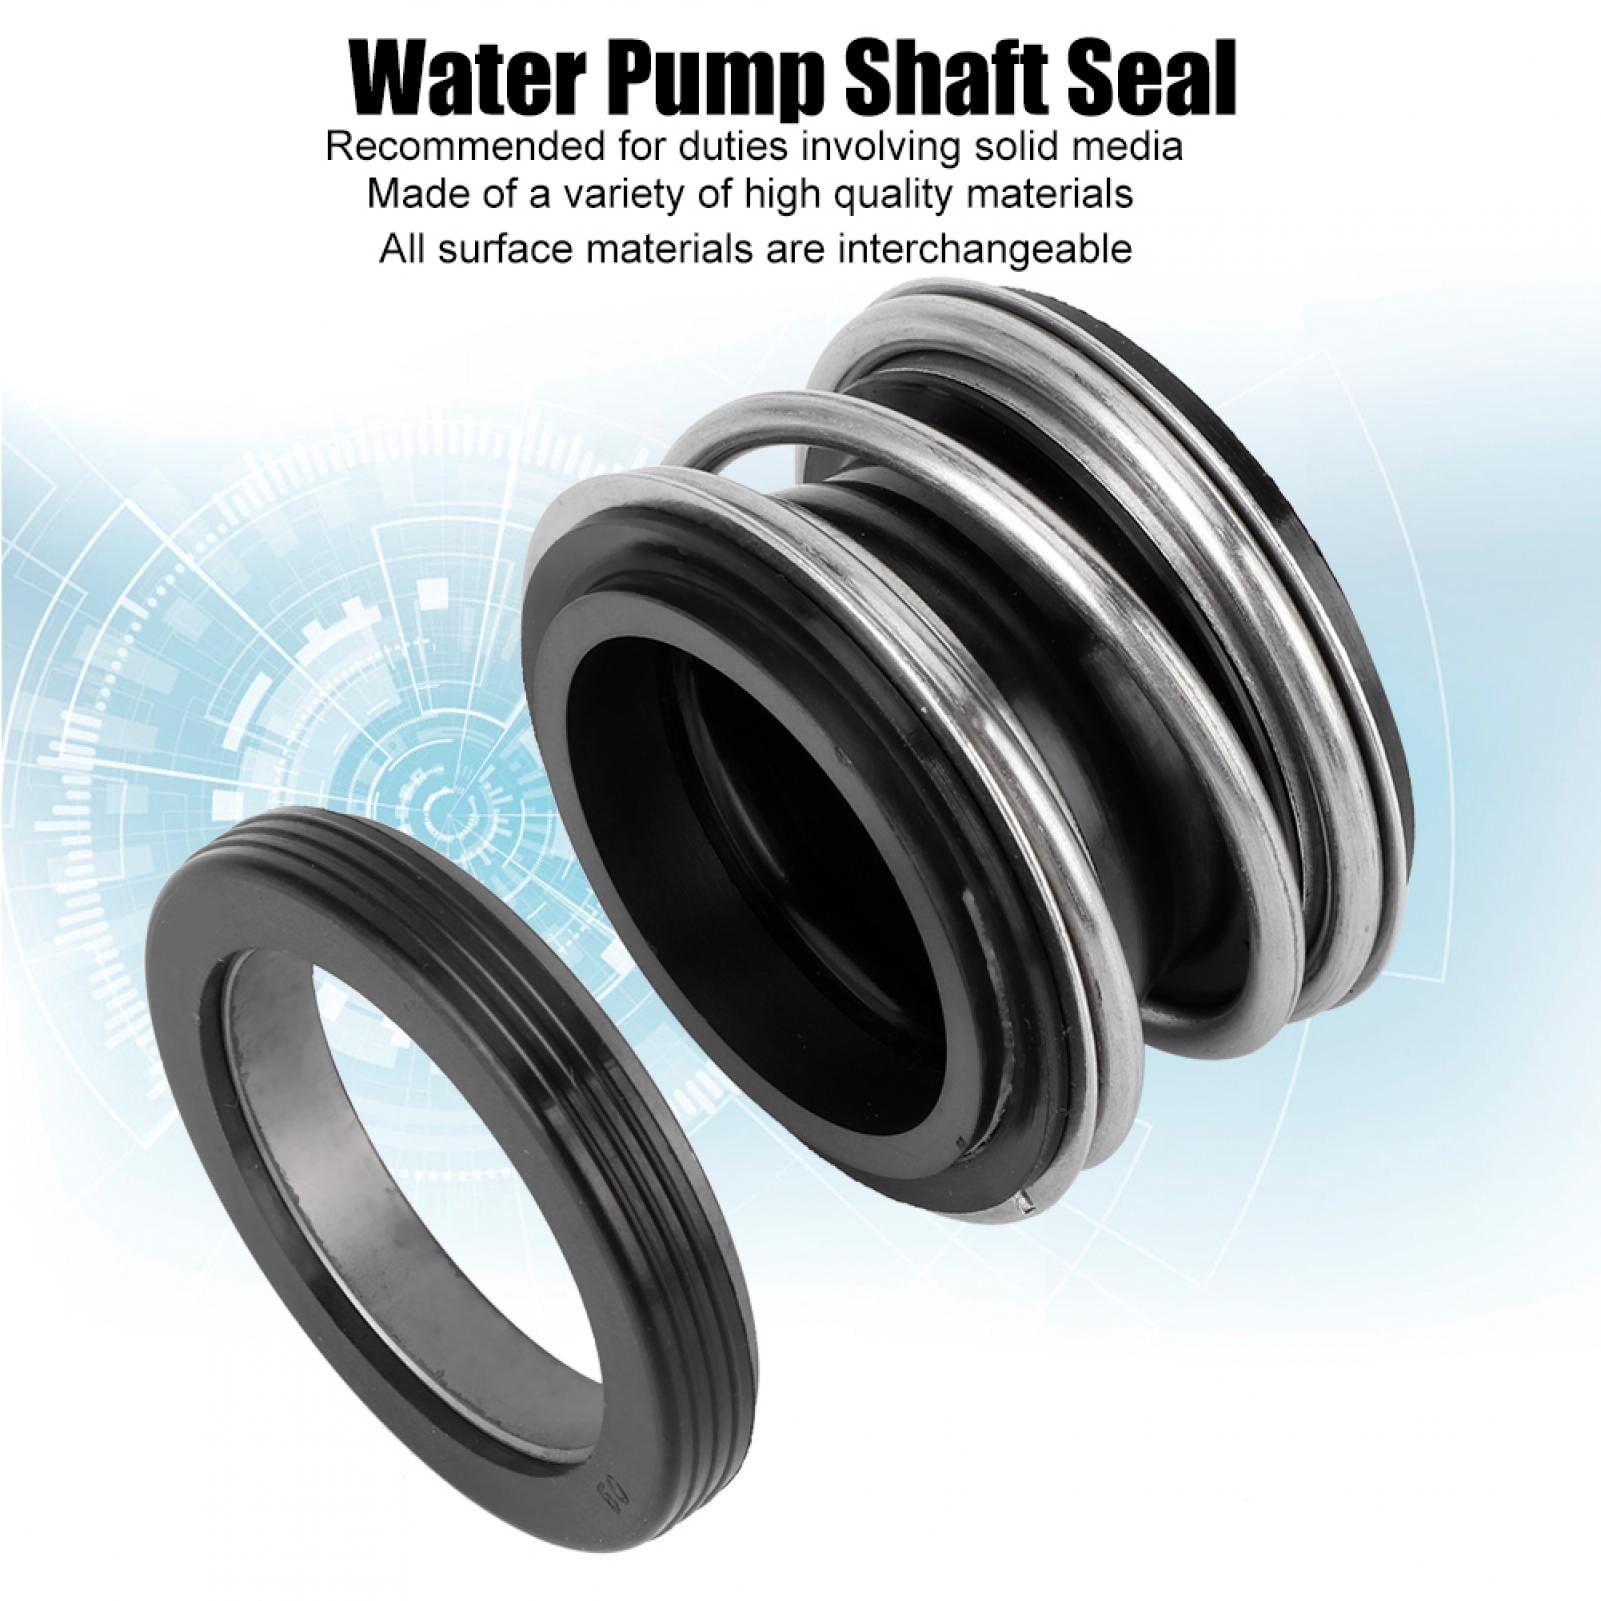 New Water Pump Shaft Seal Graphite Silicon Carbide Mechiacl Sealing Ring Spring 